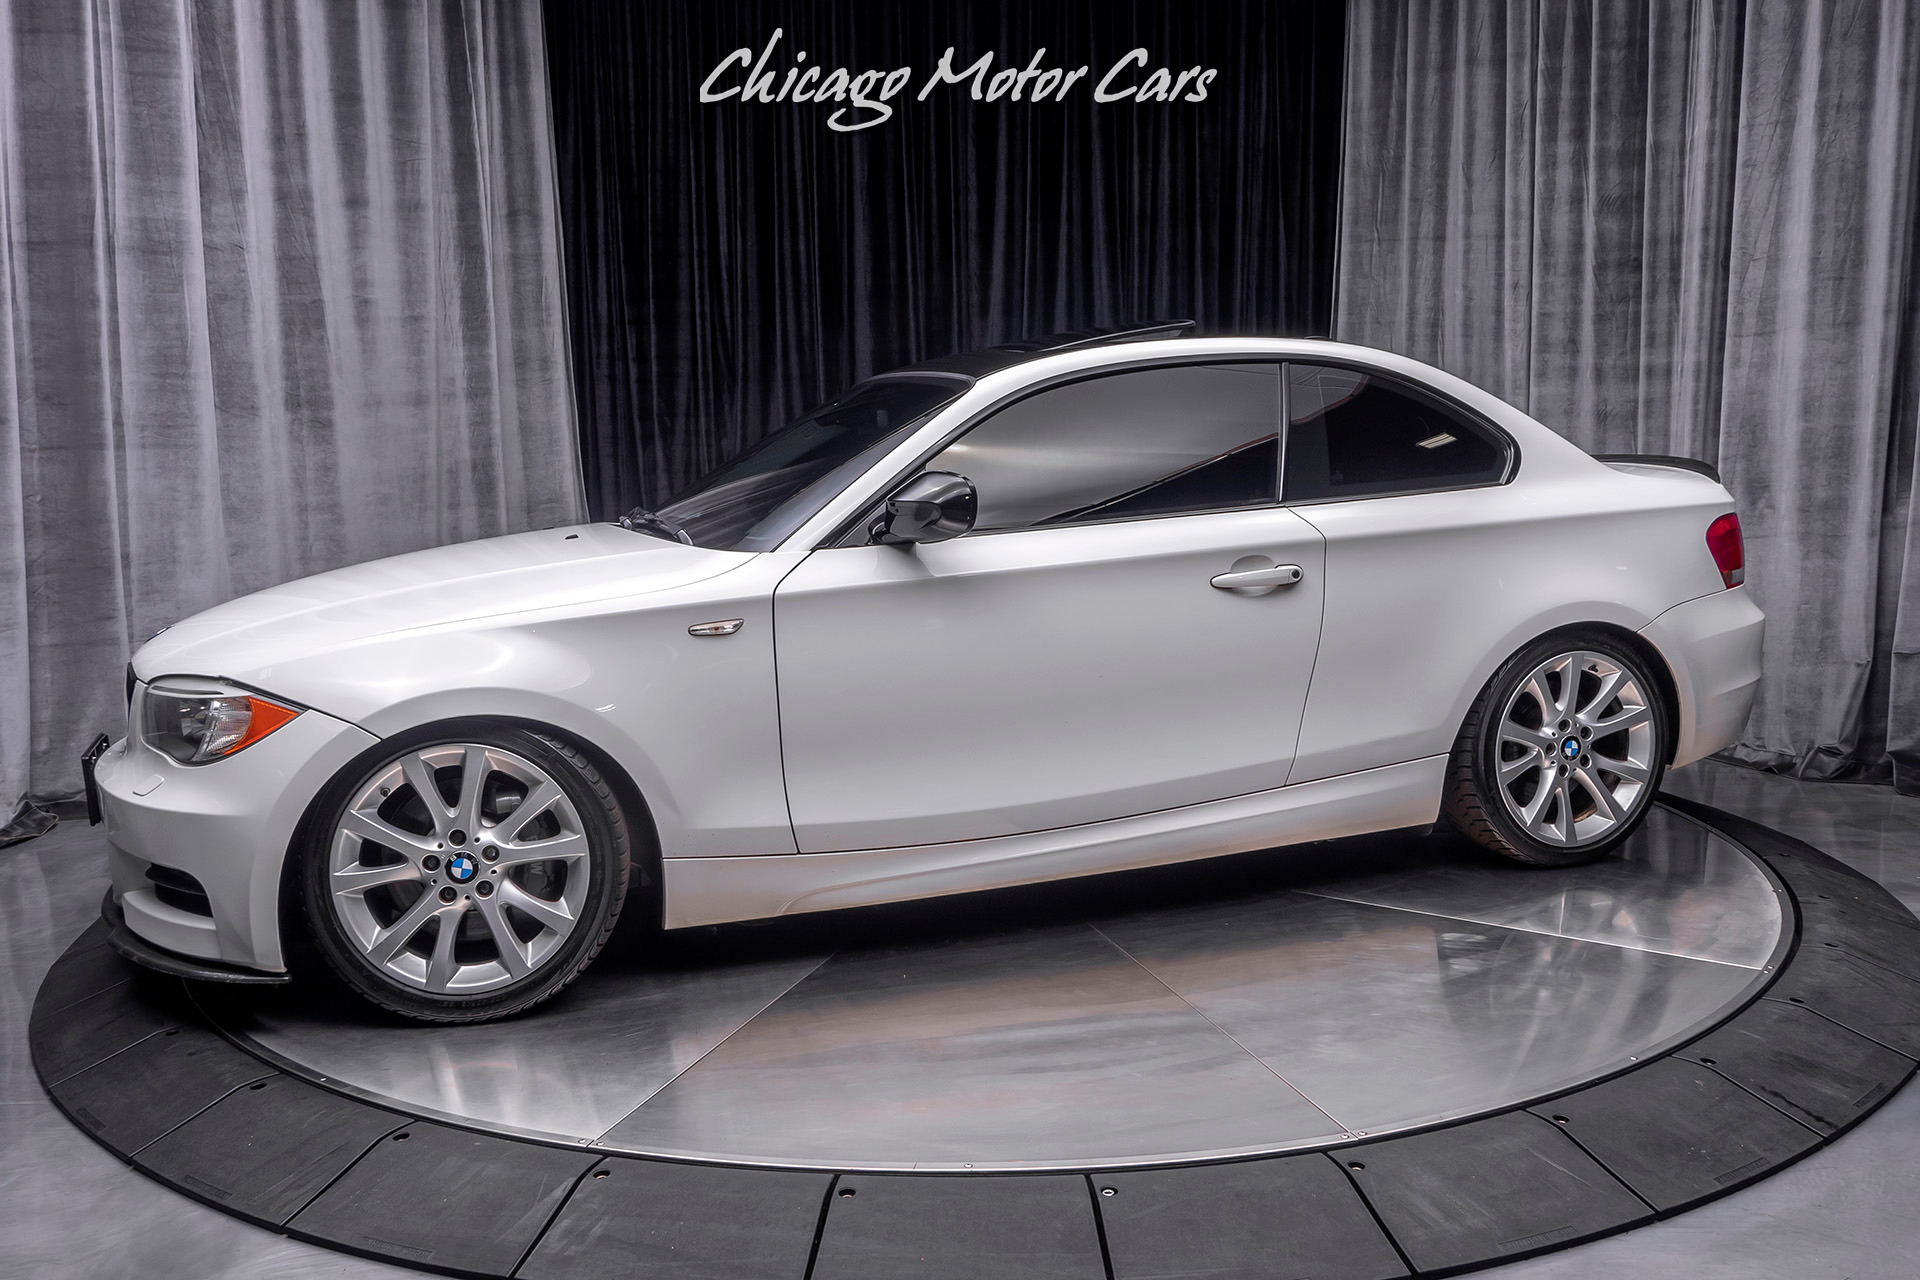 Used 2012 BMW 135i Coupe MSRP $45K+ PREMIUM PACKAGE! Navigation! 300 HP!  For Sale (Special Pricing) | Chicago Motor Cars Stock #16419